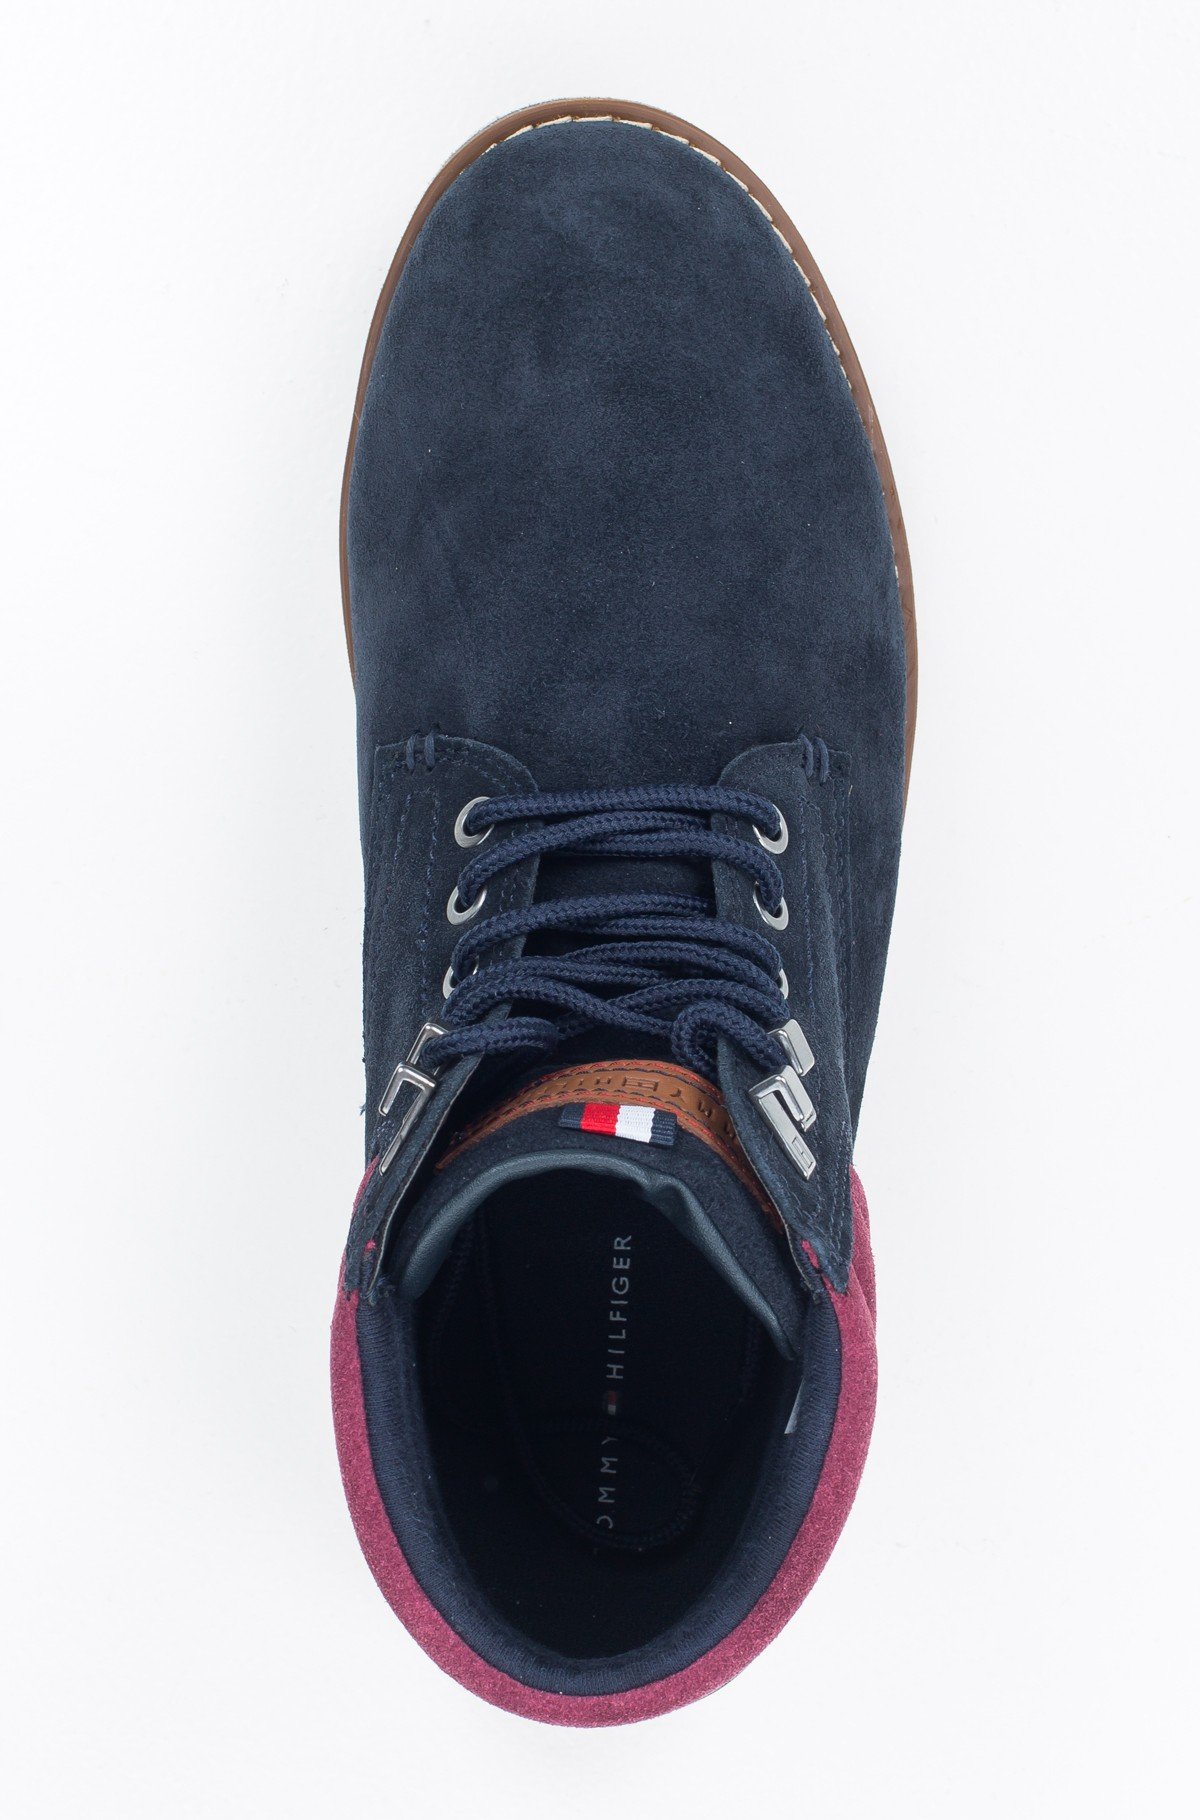 tommy hilfiger outdoor suede boot